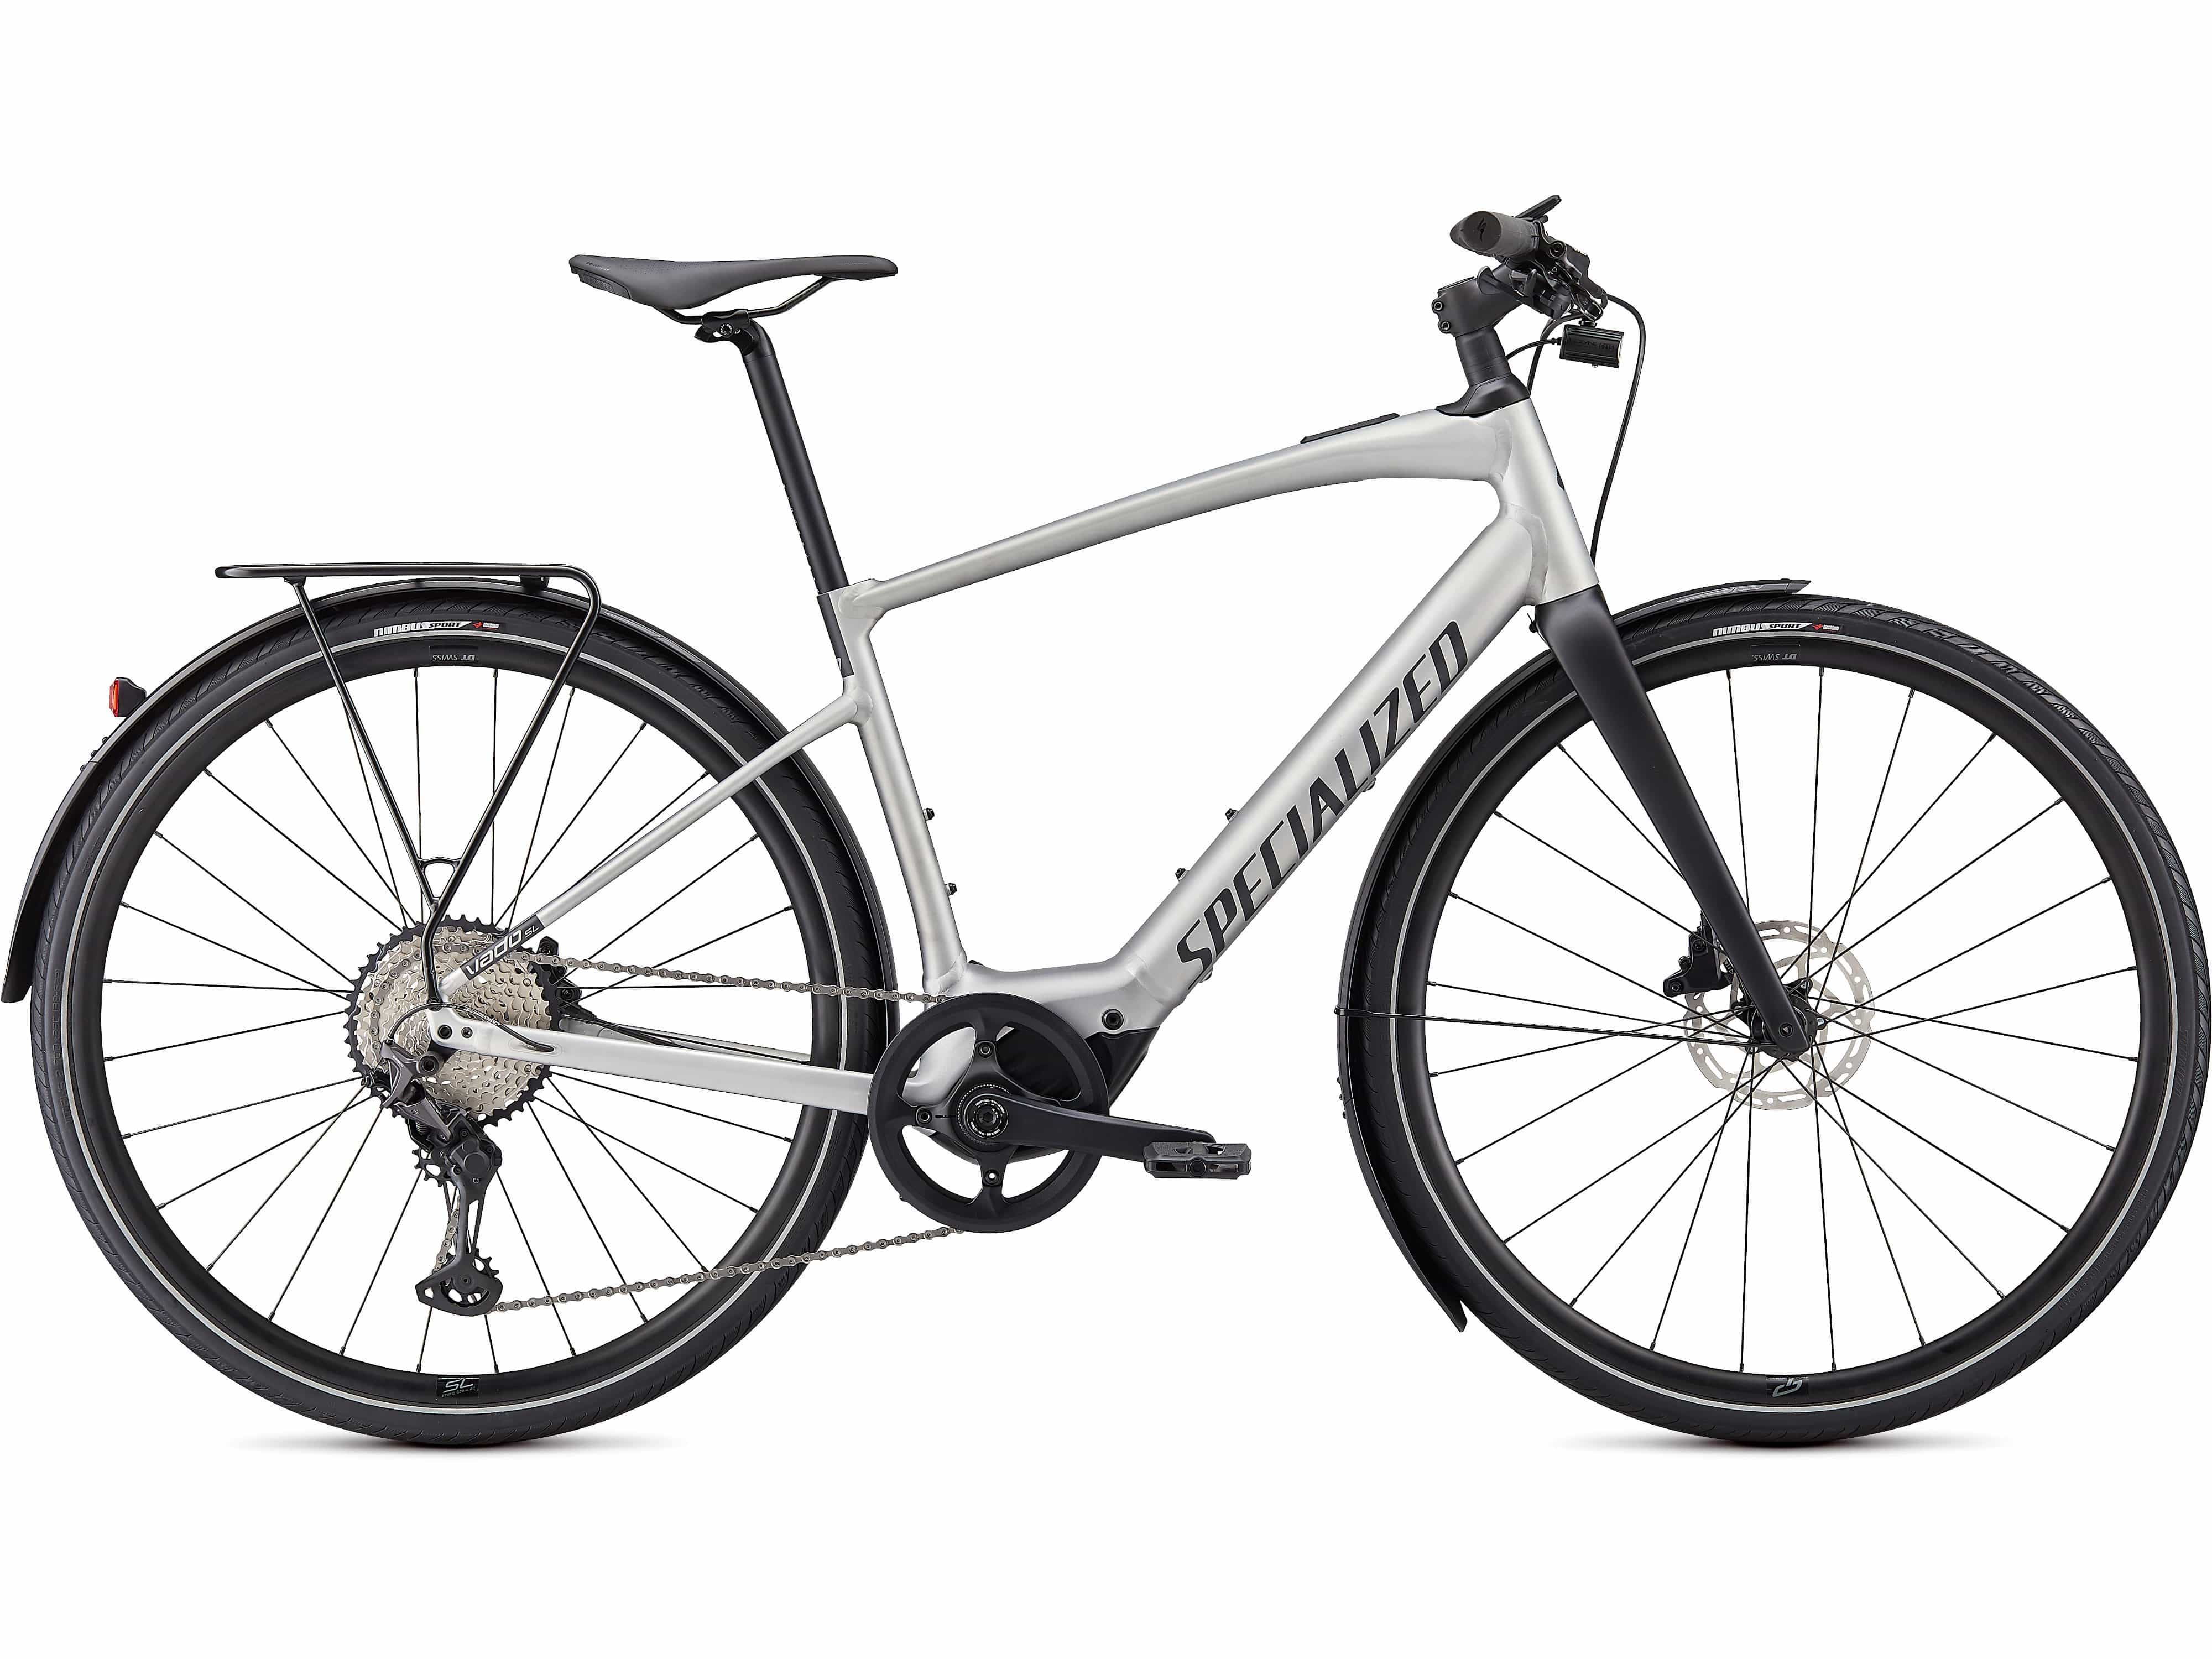 Specialized Turbo Vado SL 5.0 EQ eBike For Sale Fly Rides USA